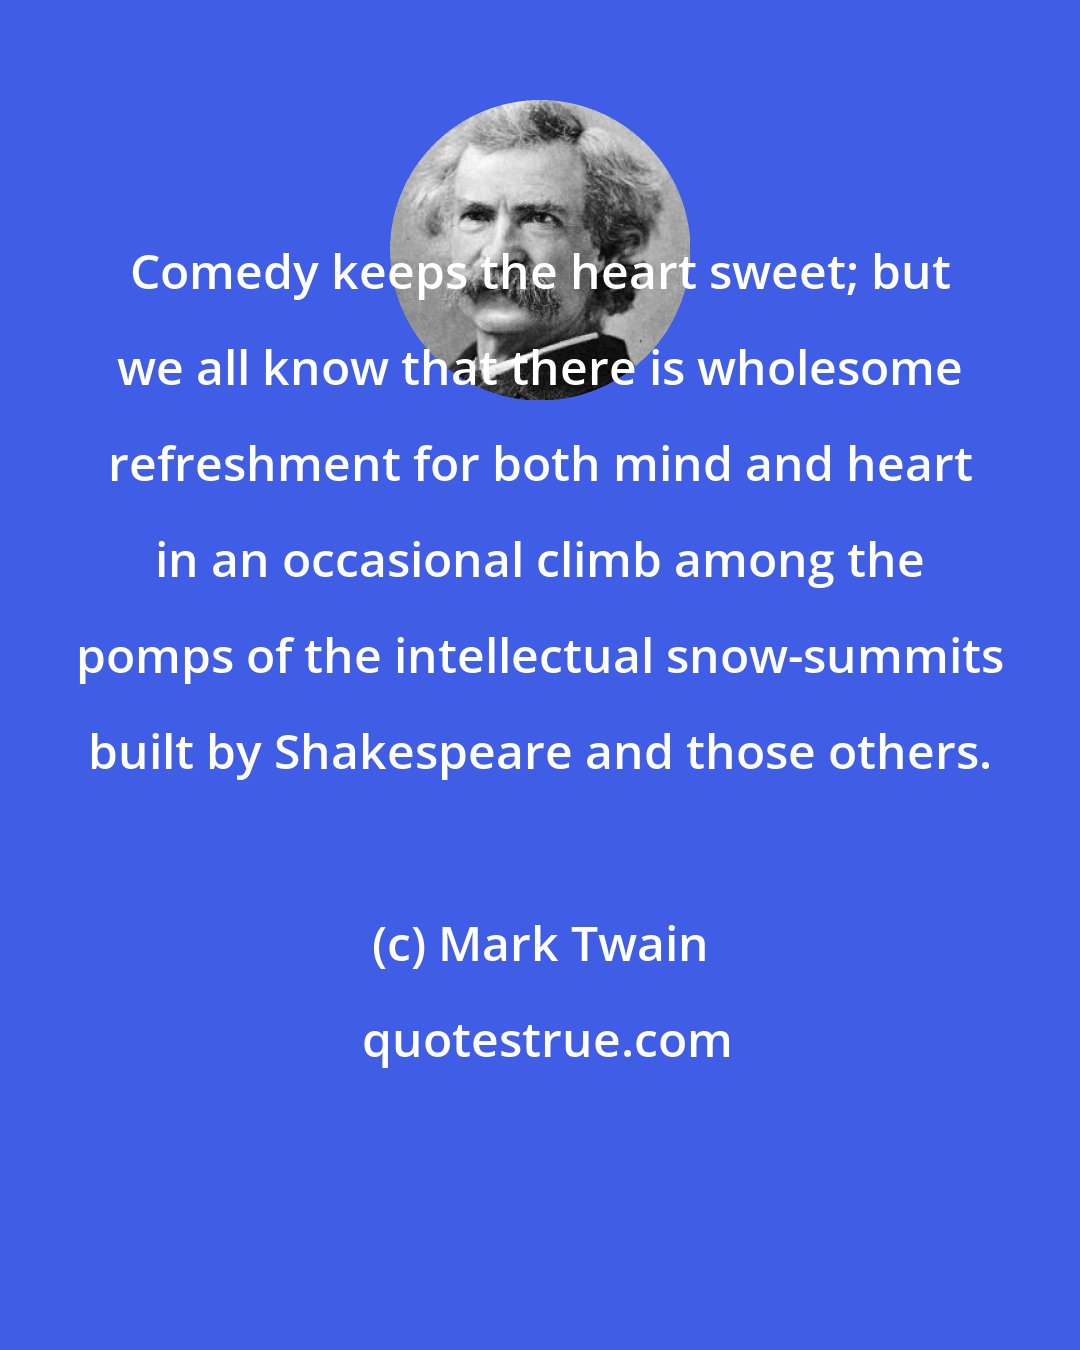 Mark Twain: Comedy keeps the heart sweet; but we all know that there is wholesome refreshment for both mind and heart in an occasional climb among the pomps of the intellectual snow-summits built by Shakespeare and those others.